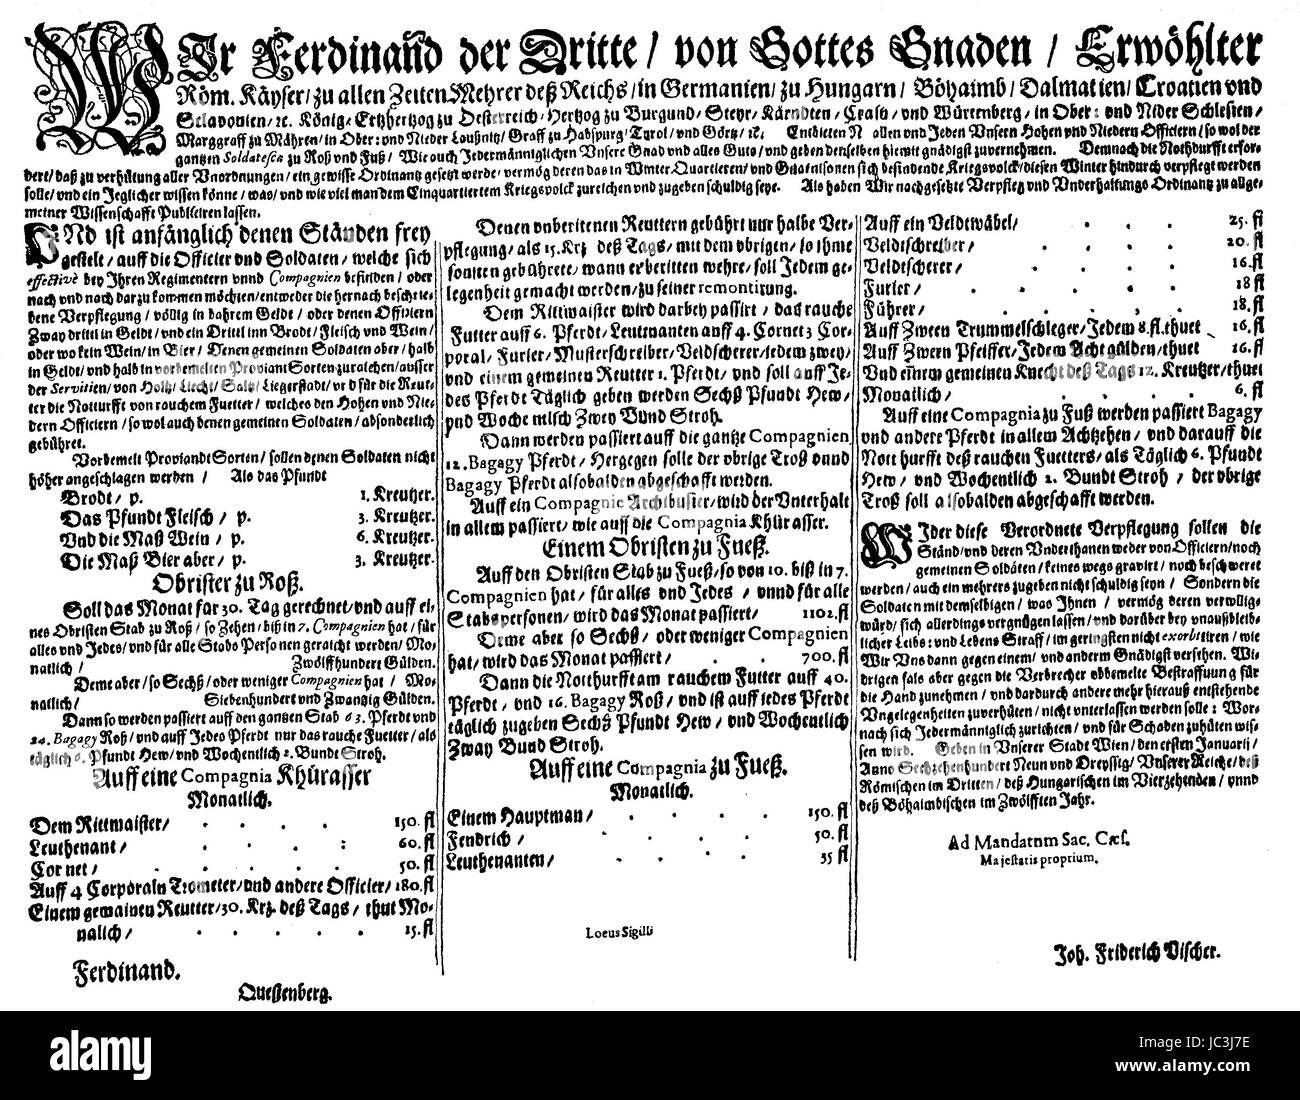 Imperial dietary ordinance from 1639, Ferdinand III. In the seventeenth and eighteenth centuries, the order of the diet was a list of the wages of the soldiers, digital improved reproduction from a publication of the year 1880 Stock Photo